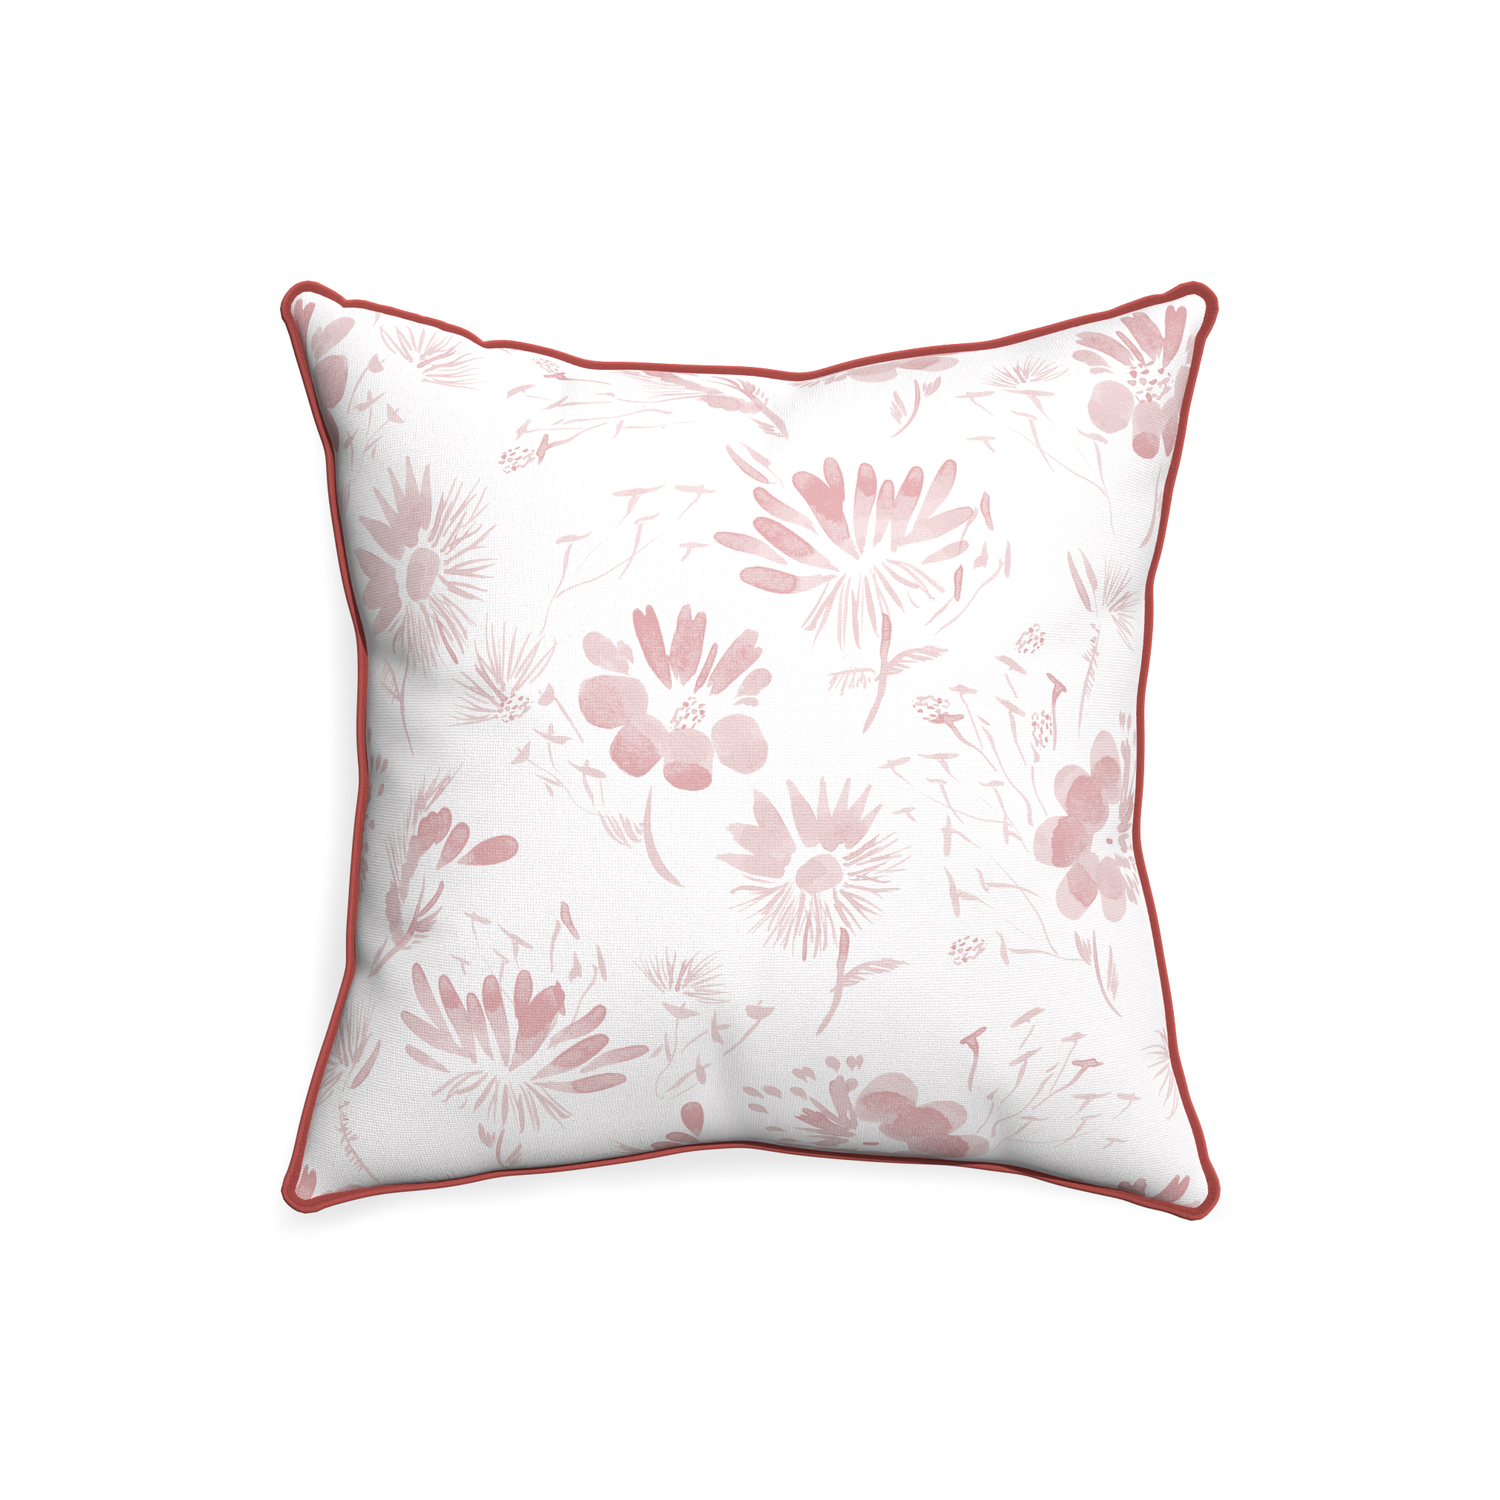 20-square blake custom pillow with c piping on white background